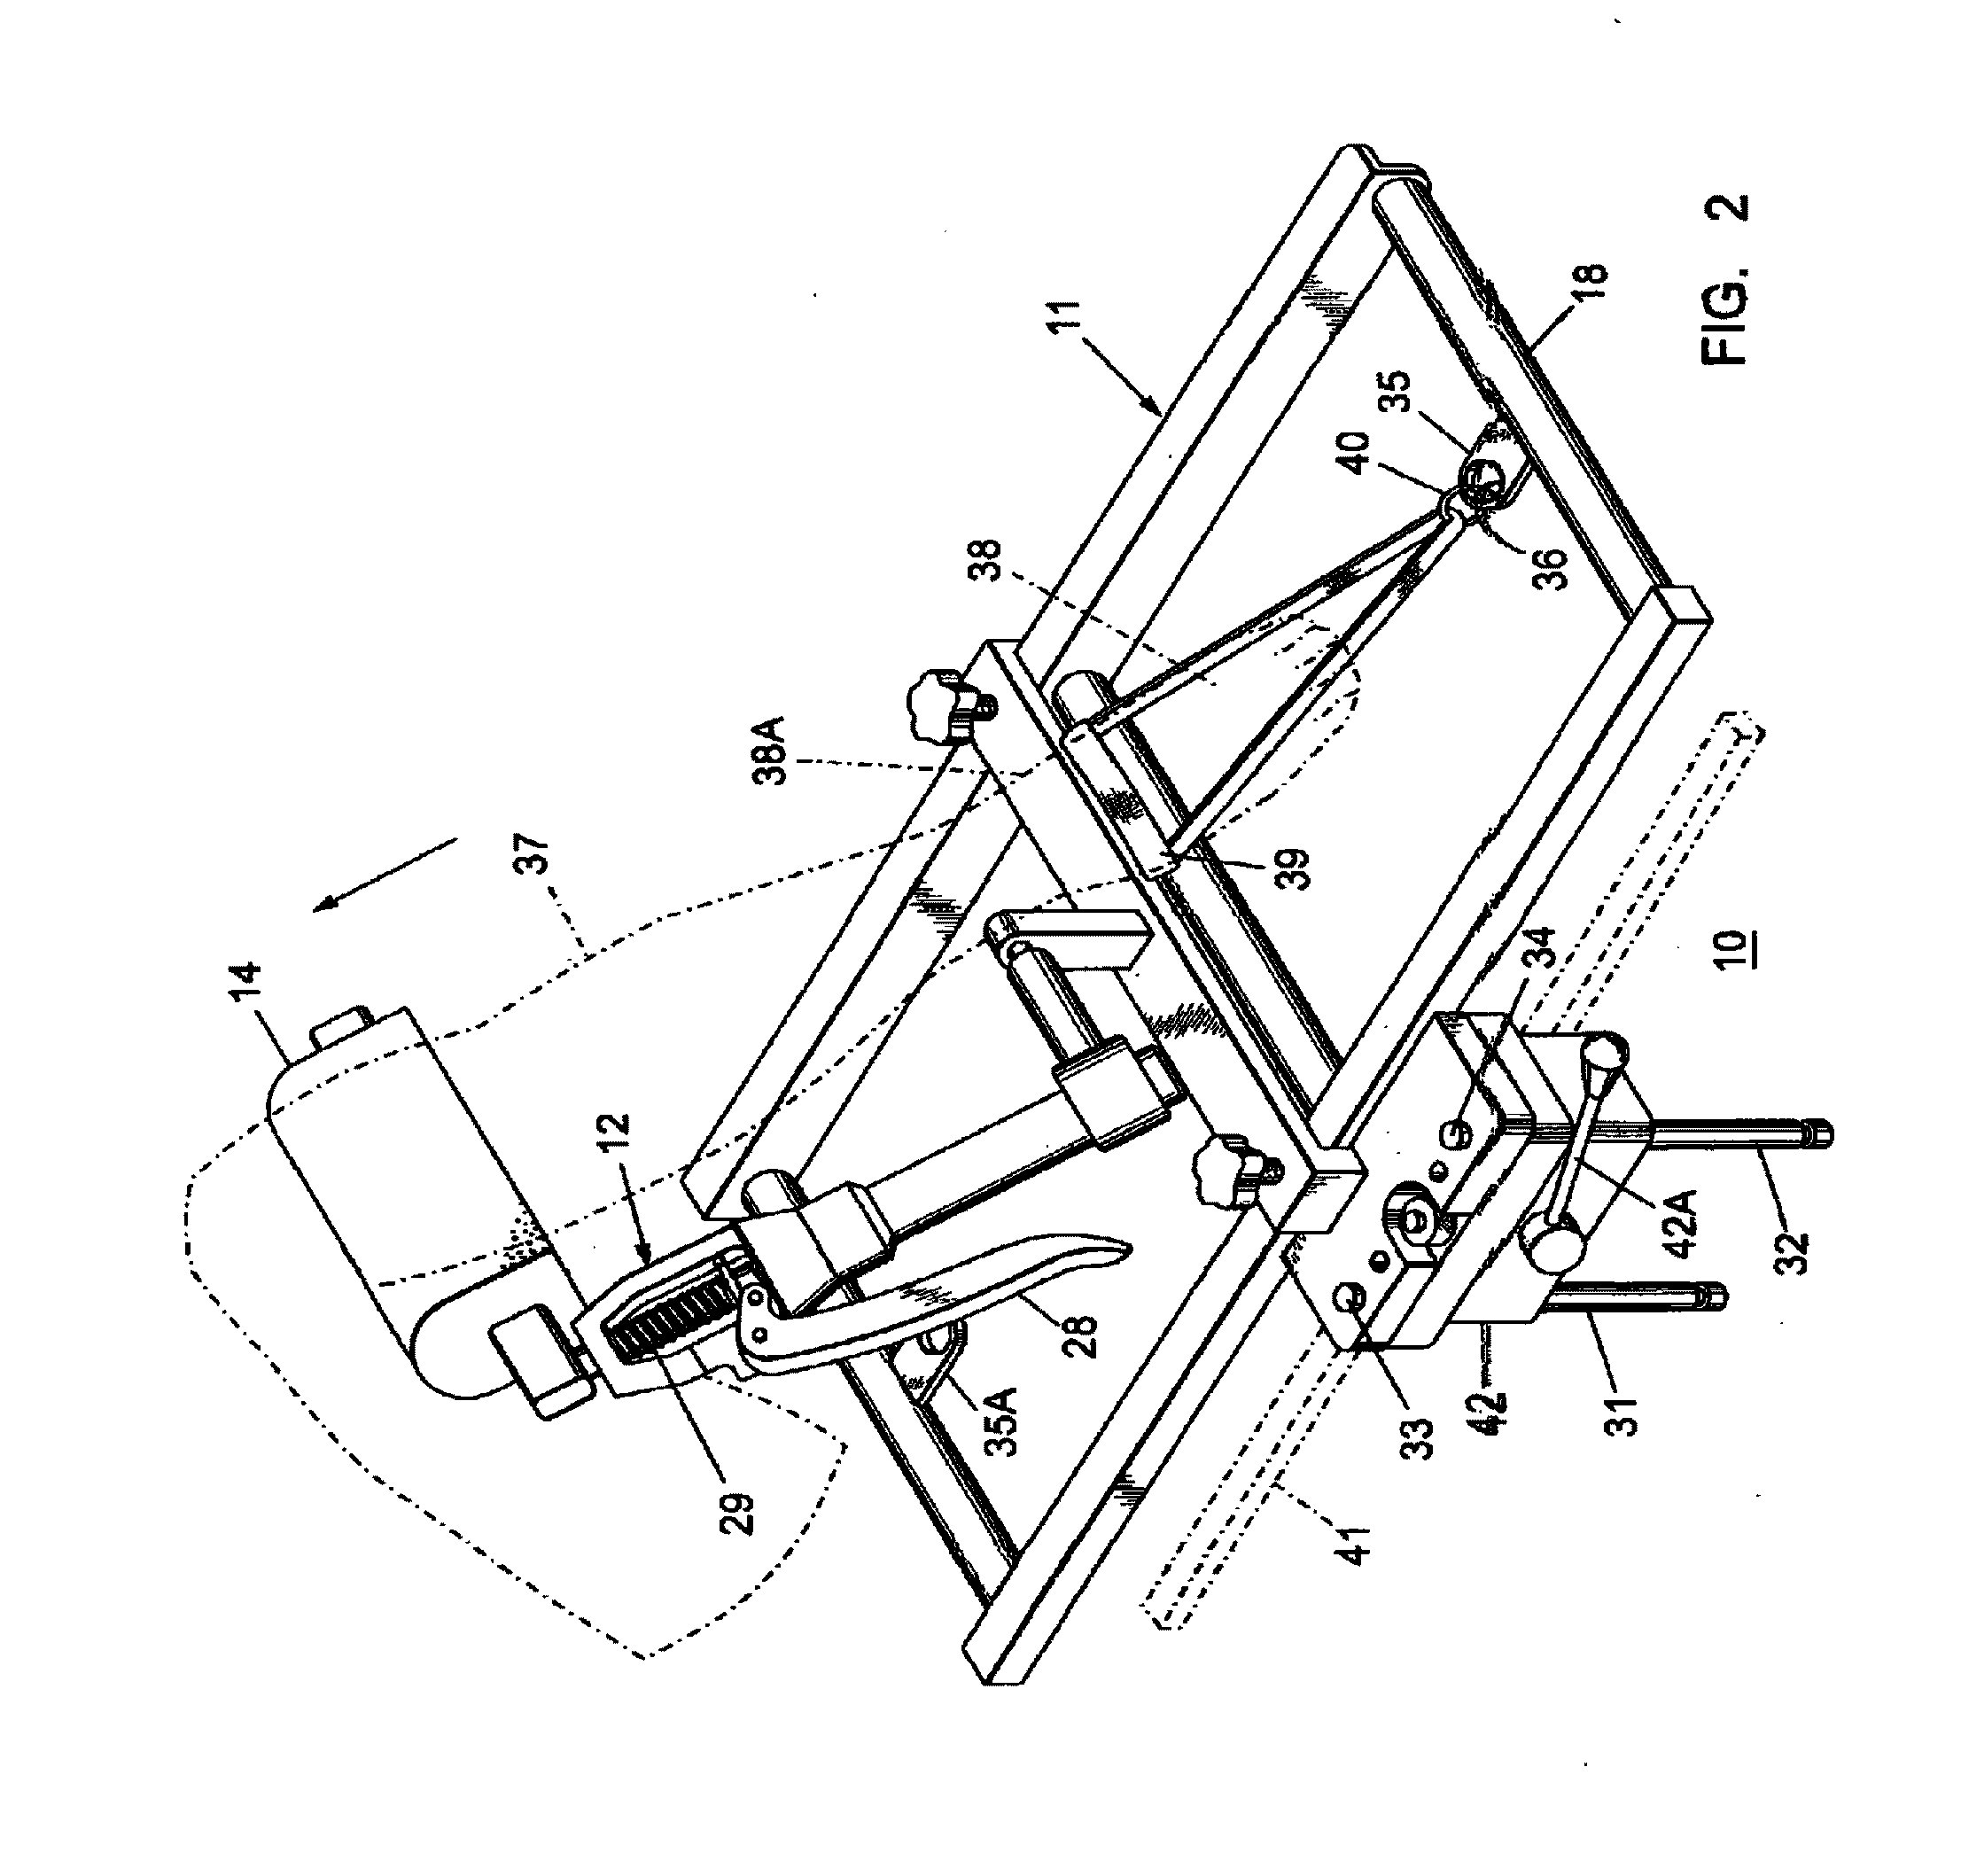 Elevation device for modular distractor for use in ankle and leg surgery